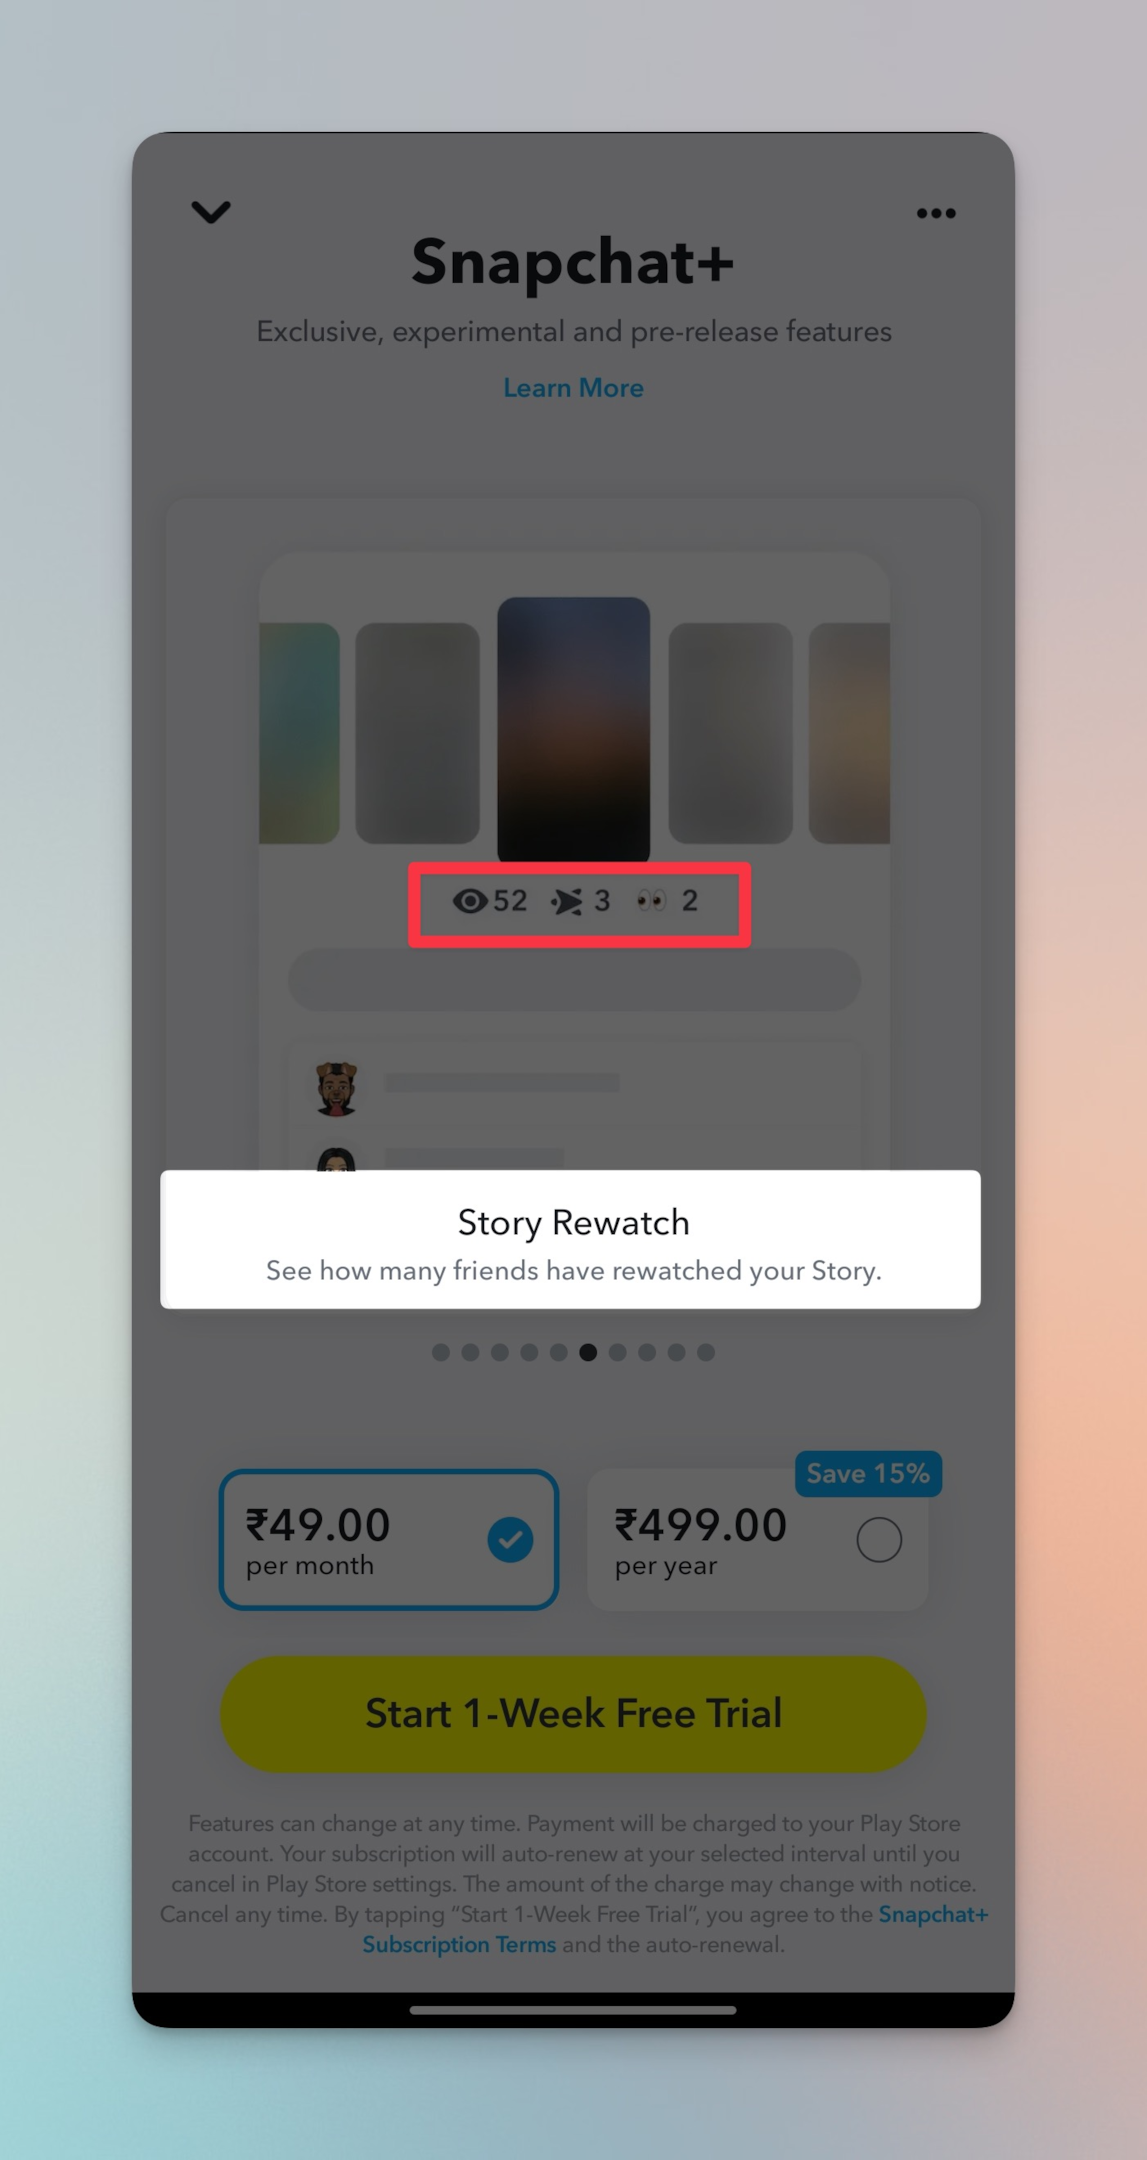 Remote.tools highlighting the Snapchat+ subscription of multiple story view count